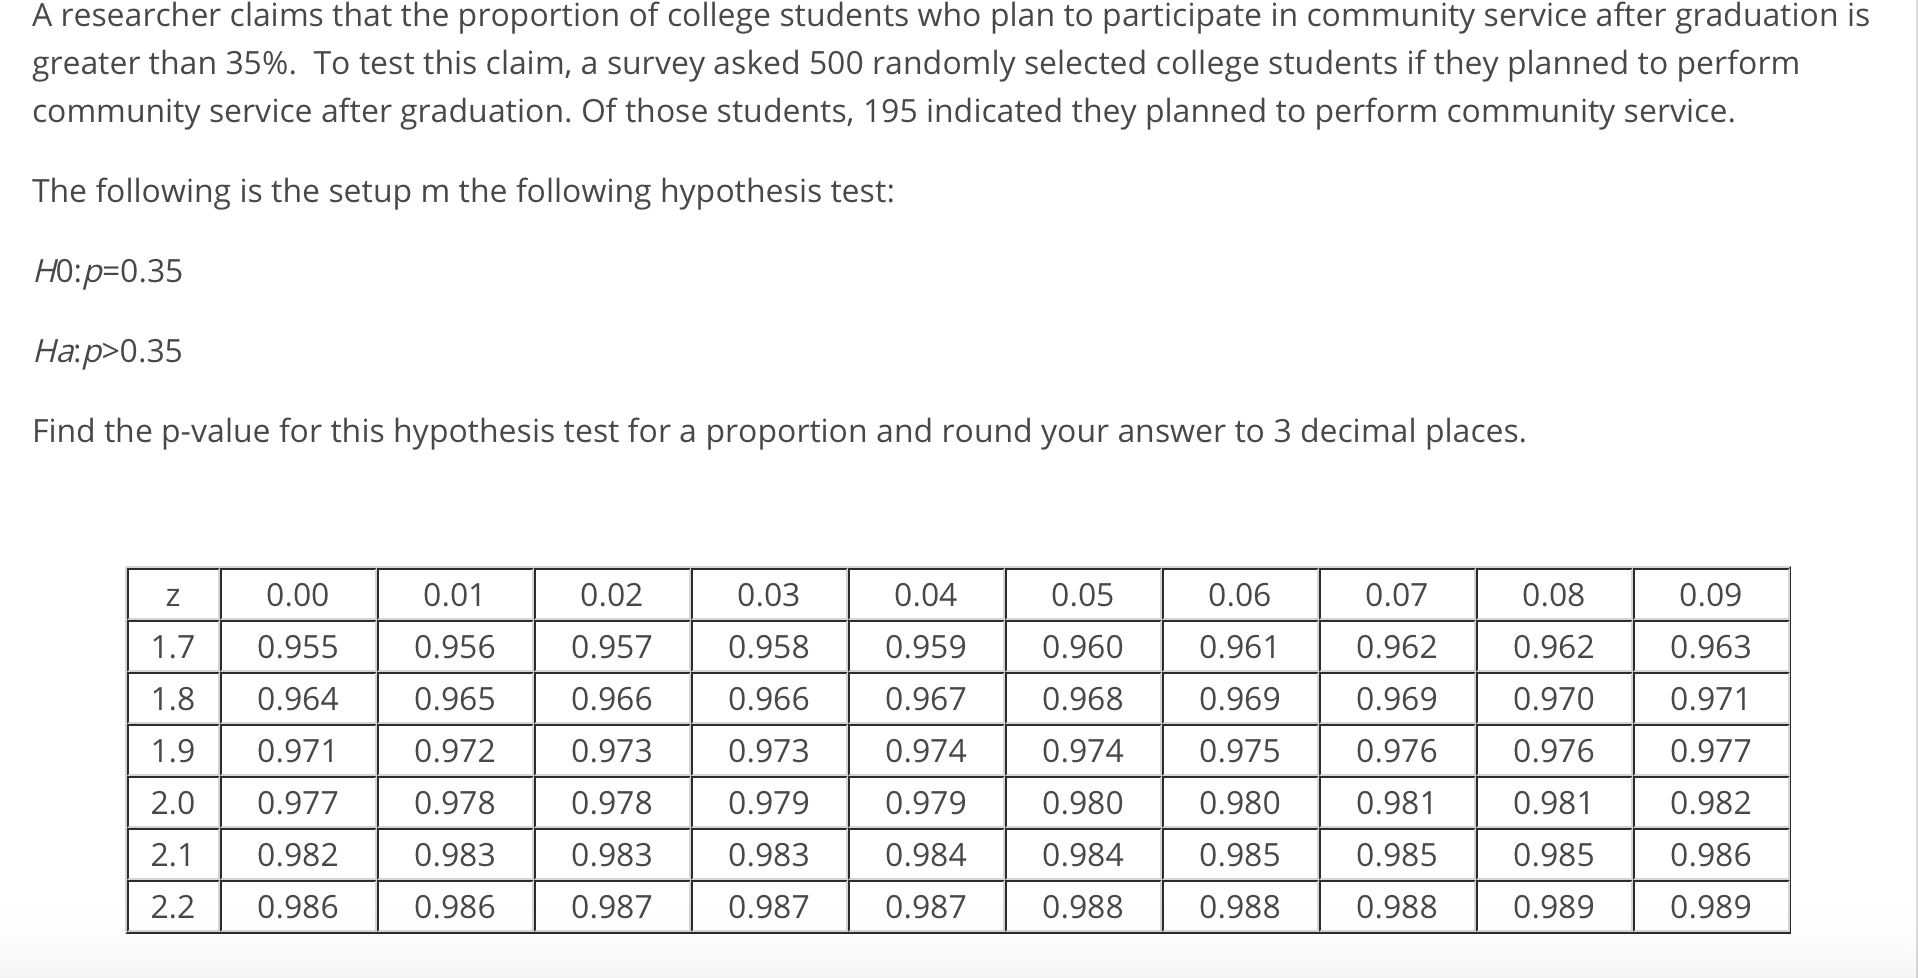 A researcher claims that the proportion of college students who plan to participate in community service after graduation is
greater than 35%. To test this claim, a survey asked 500 randomly selected college students if they planned to perform
community service after graduation. Of those students, 195 indicated they planned to perform community service.
The following is the setup m the following hypothesis test:
НО: р-0 .35
на: р>0 .35
Find the p-value for this hypothesis test for a proportion and round your answer to 3 decimal places.
0.00
1.7 0.955
1.8 0.964
1.90.971
2.0 0.977
2.10.982
2.20.986
0.01
0.956
0.965
0.972
0.978
0.983
0.986
0.02
0.957
0.966
0.973
0.978
0.983
0.987
0.03
0.958
0.966
0.973
0.979
0.983
0.987
0.04
0.959
0.967
0.974
0.979
0.984
0.987
0.05
0.960
0.968
0.974
0.980
0.984
0.988
0.06
0.961
0.969
0.975
0.980
0.985
0.988
0.07
0.962
0.969
0.976
0.981
0.985
0.988
0.08
0.962
0.970
0.976
0.981
0.985
0.989
0.09
0.963
0.971
0.977
0.982
0.986
0.989
